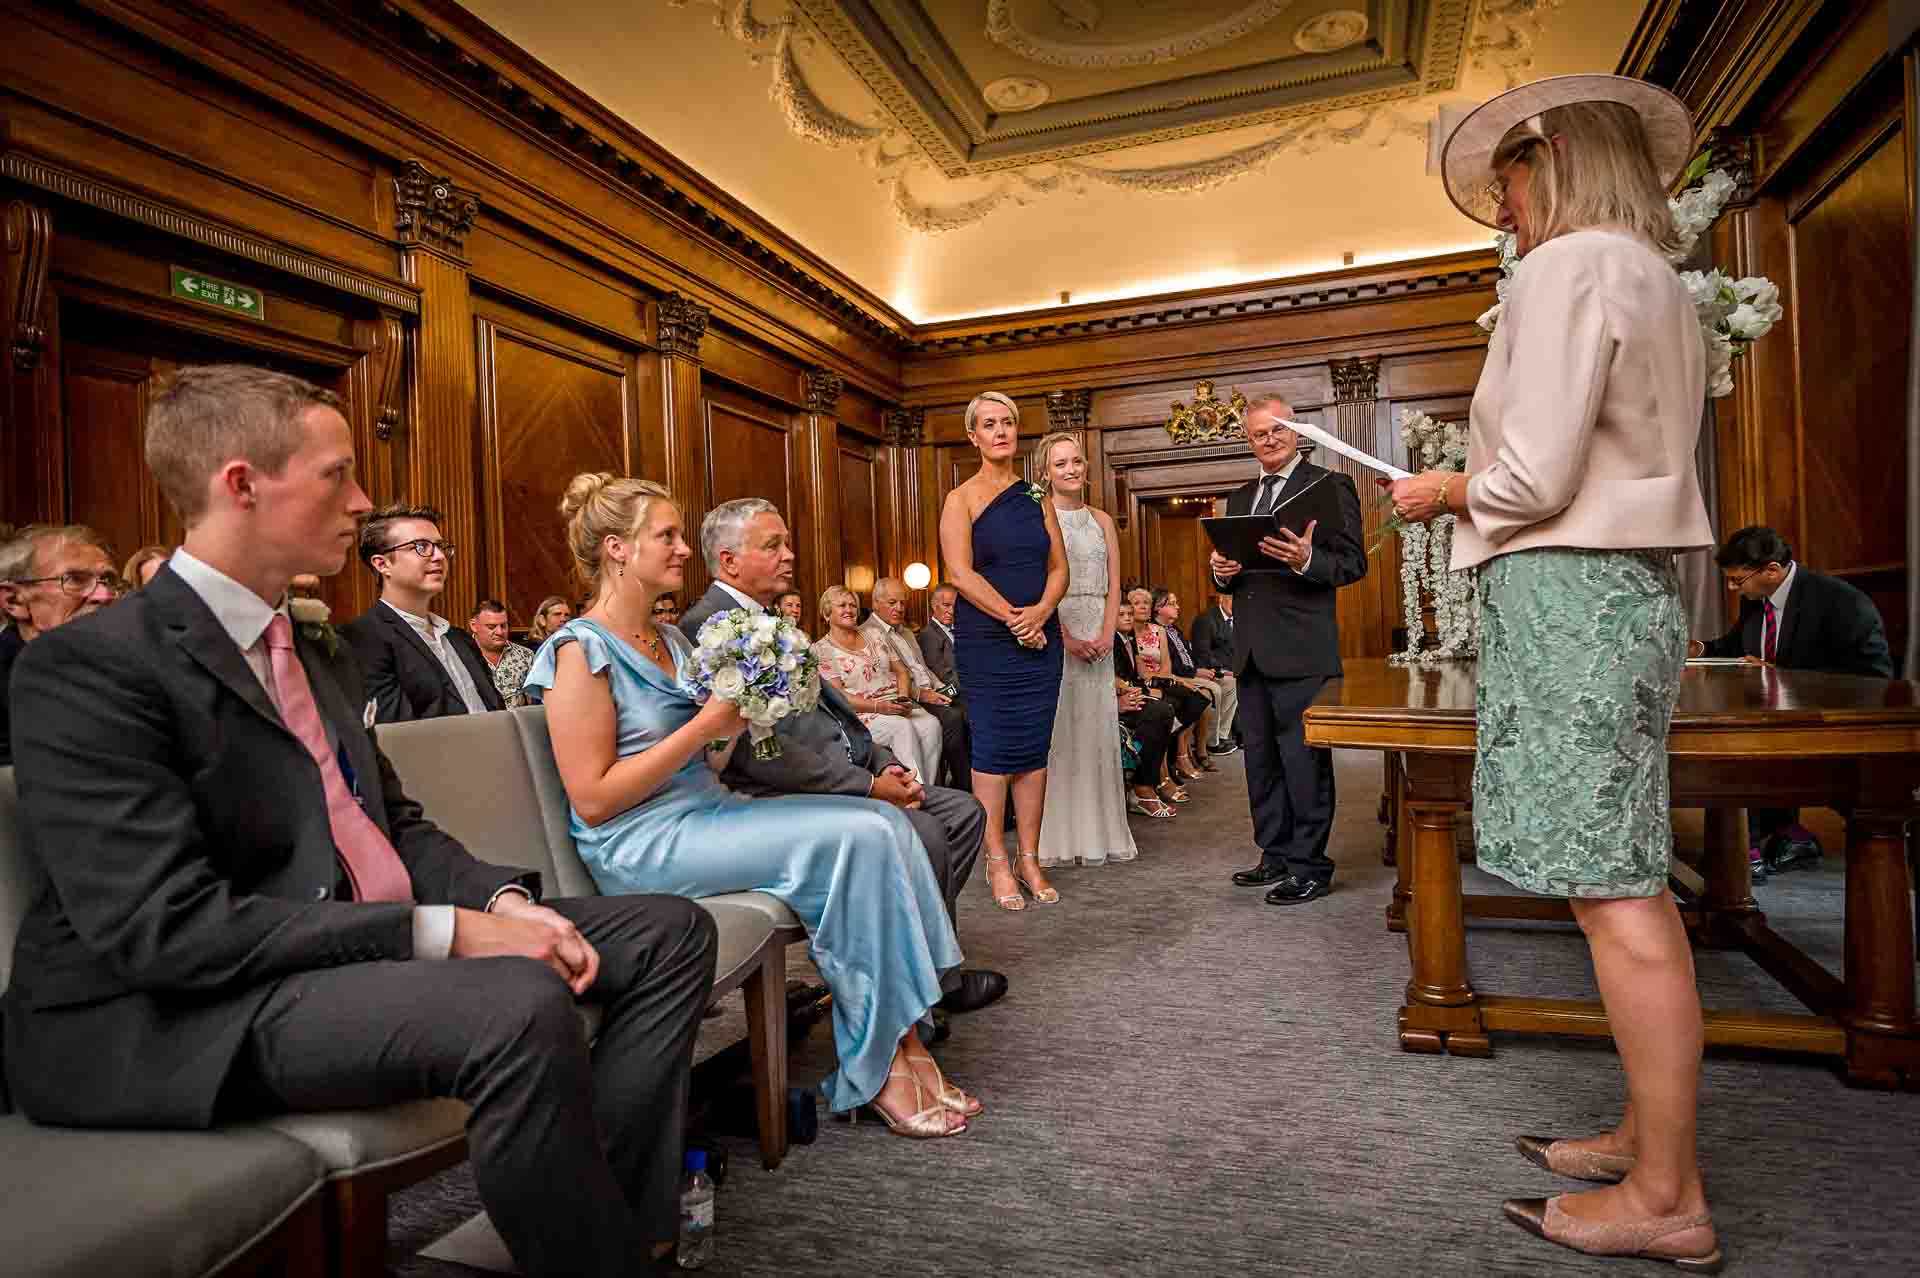 Female relative gives wedding reading at Marylebone Town Hall with brides and guests watching